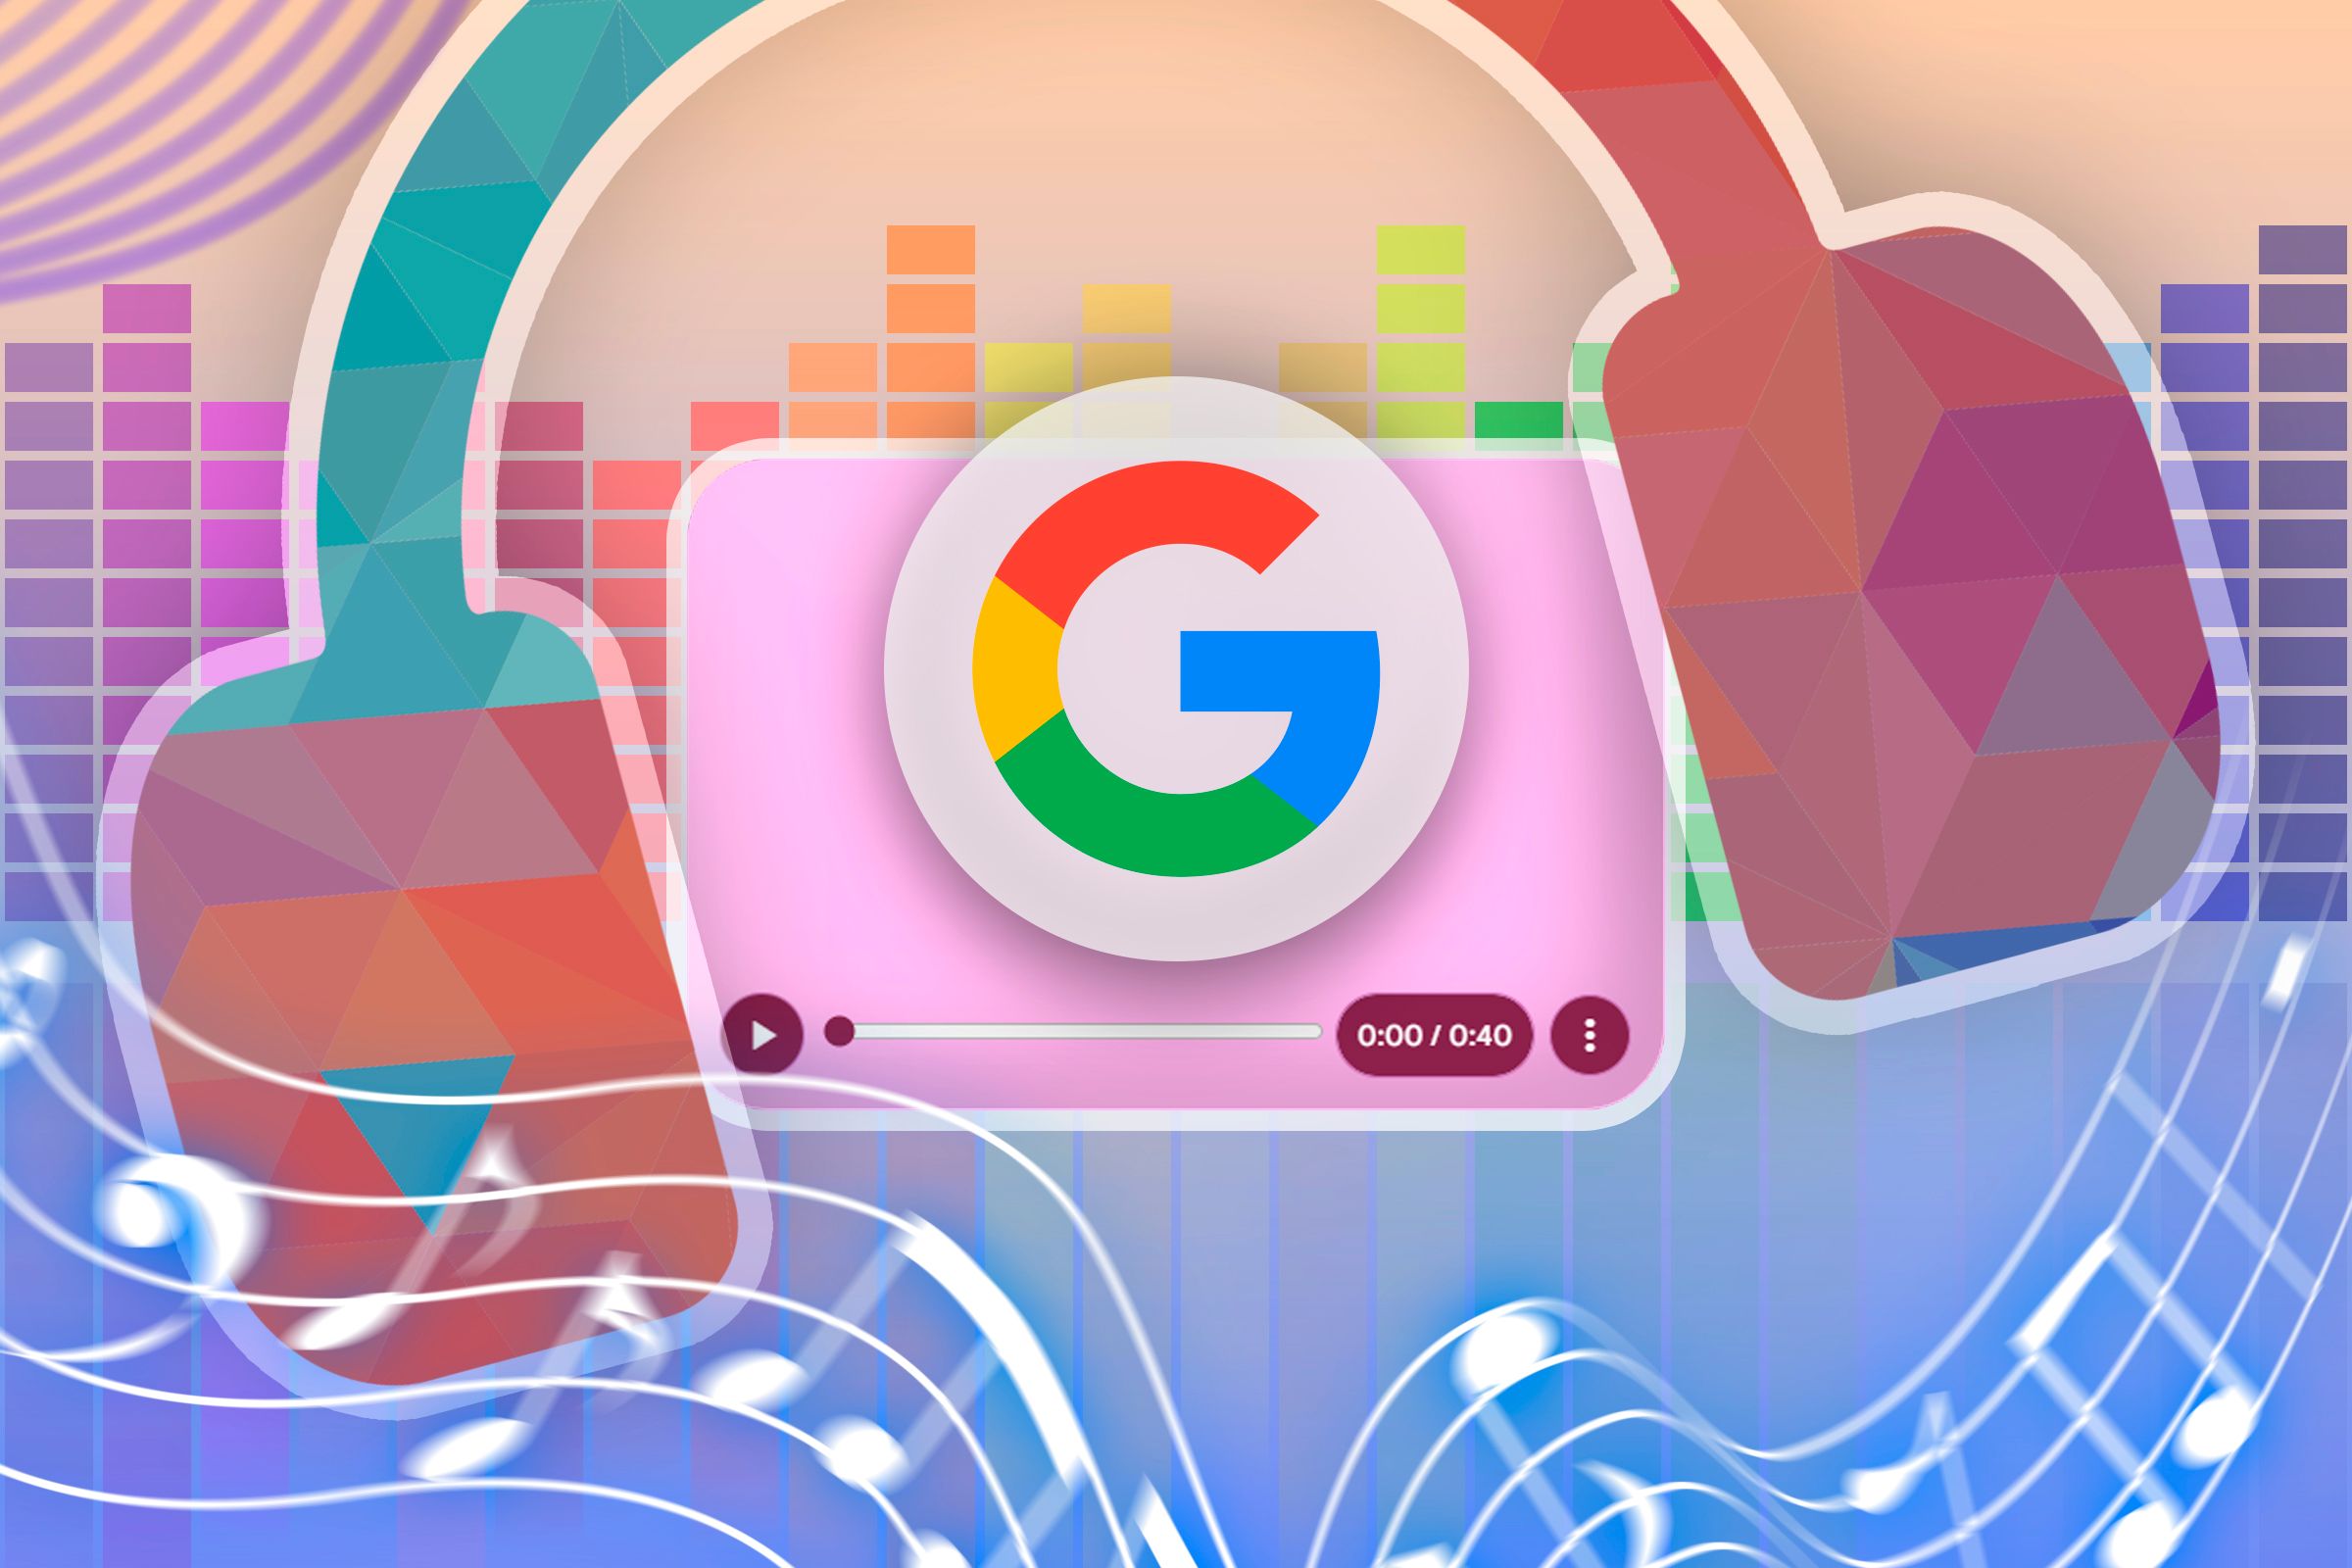 I tried out Google's new AI music tool. Here's what I got: